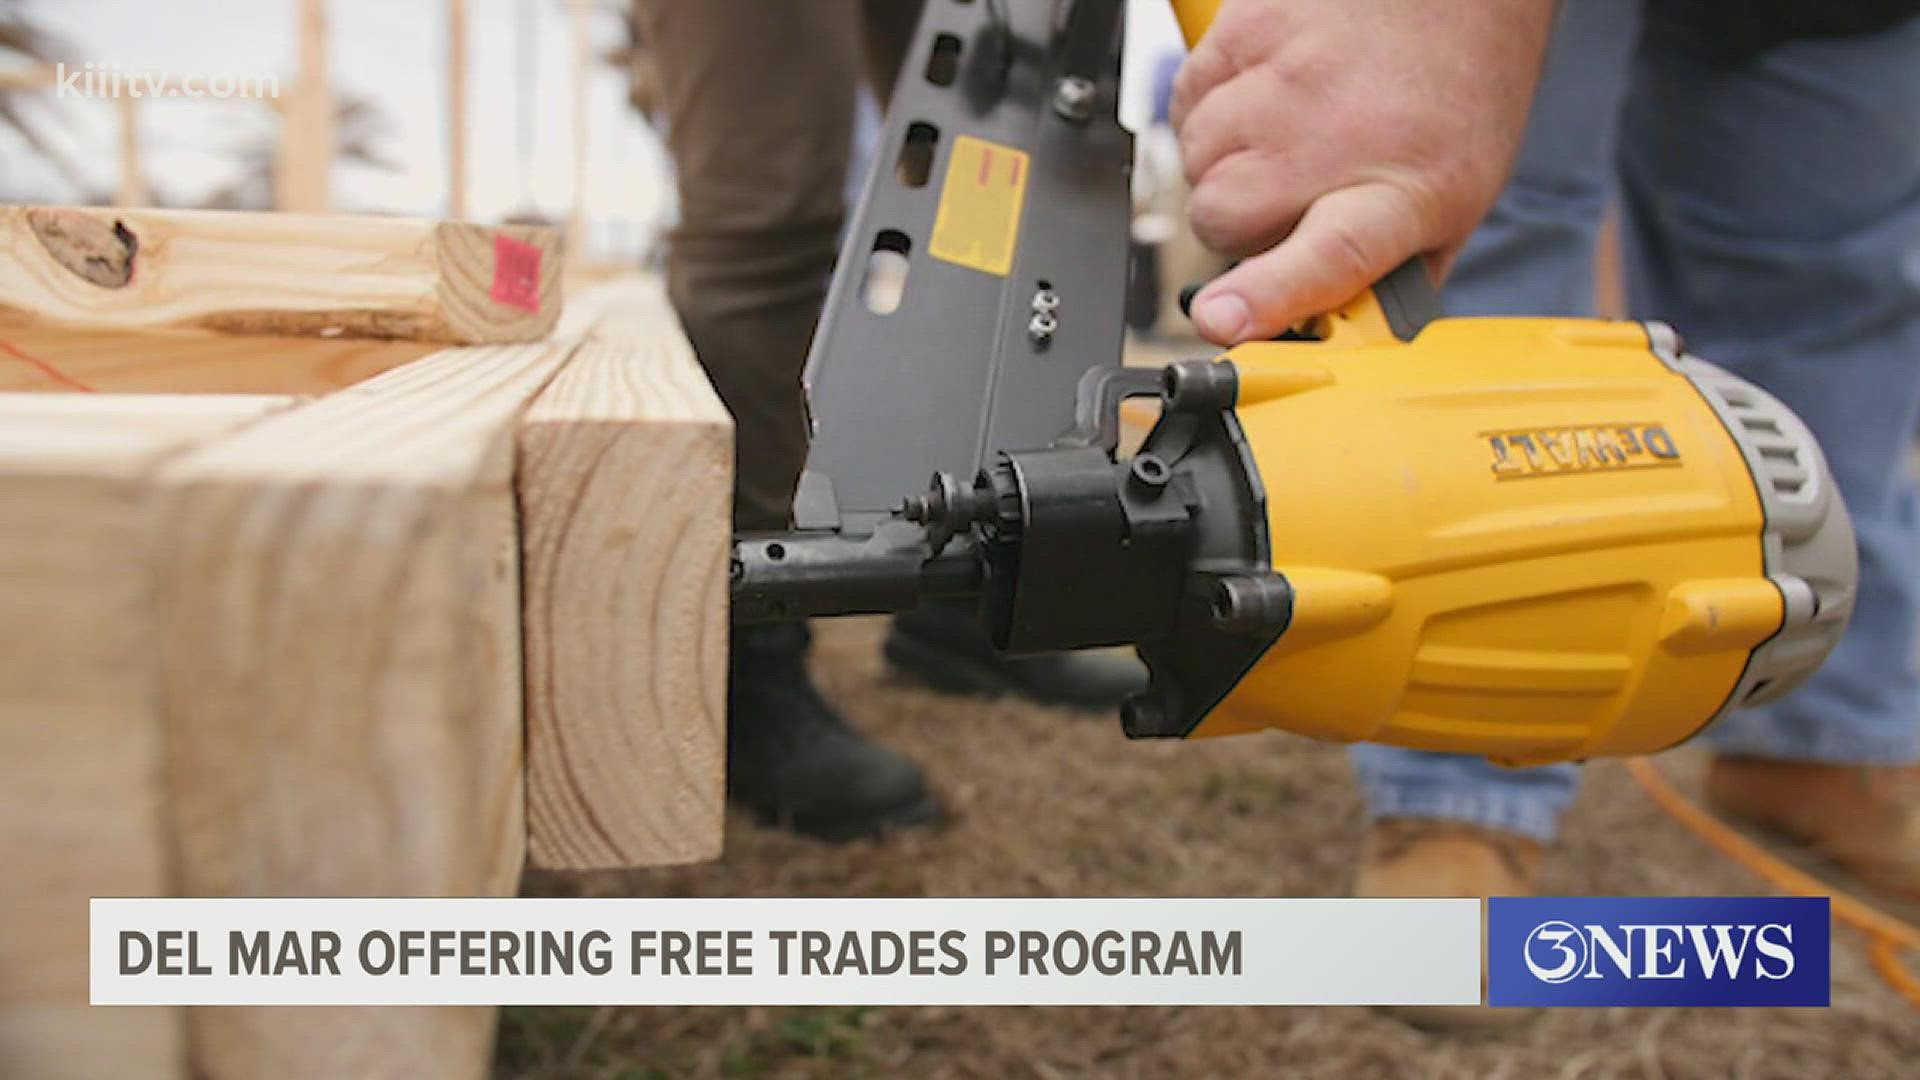 “This gives them an overall view of the carpentry business and it allows them to walk onto a job site and be hired on as a laborer or entry level carpenter,”